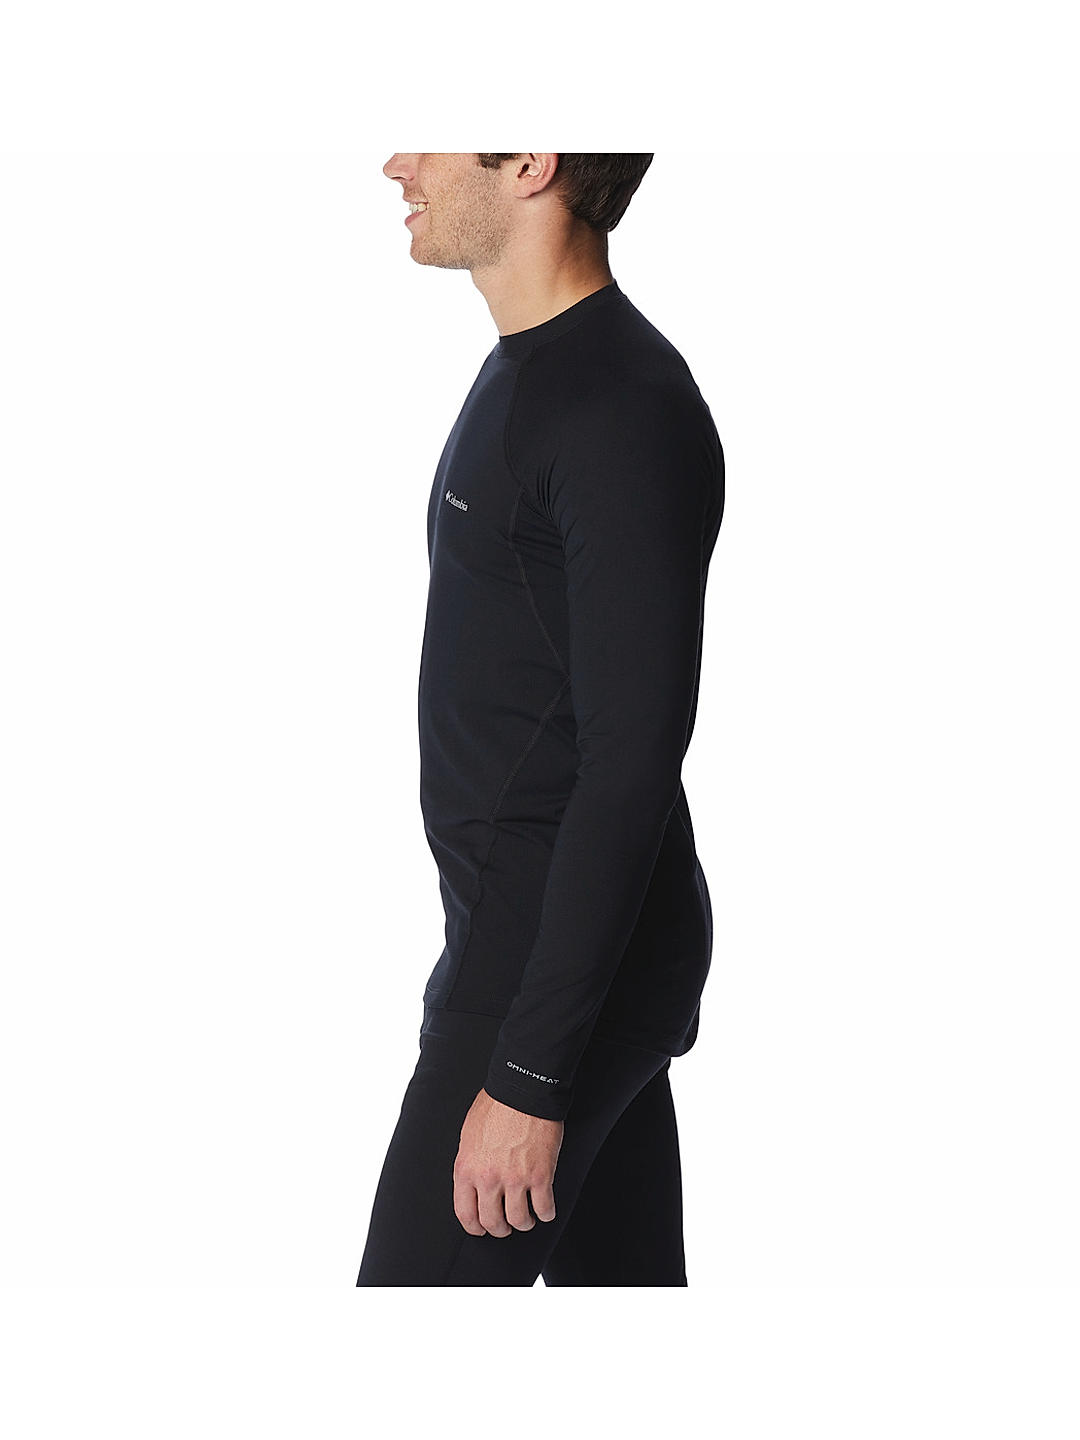 Buy Black Midweight Stretch Long Sleeve Top for Men Online at